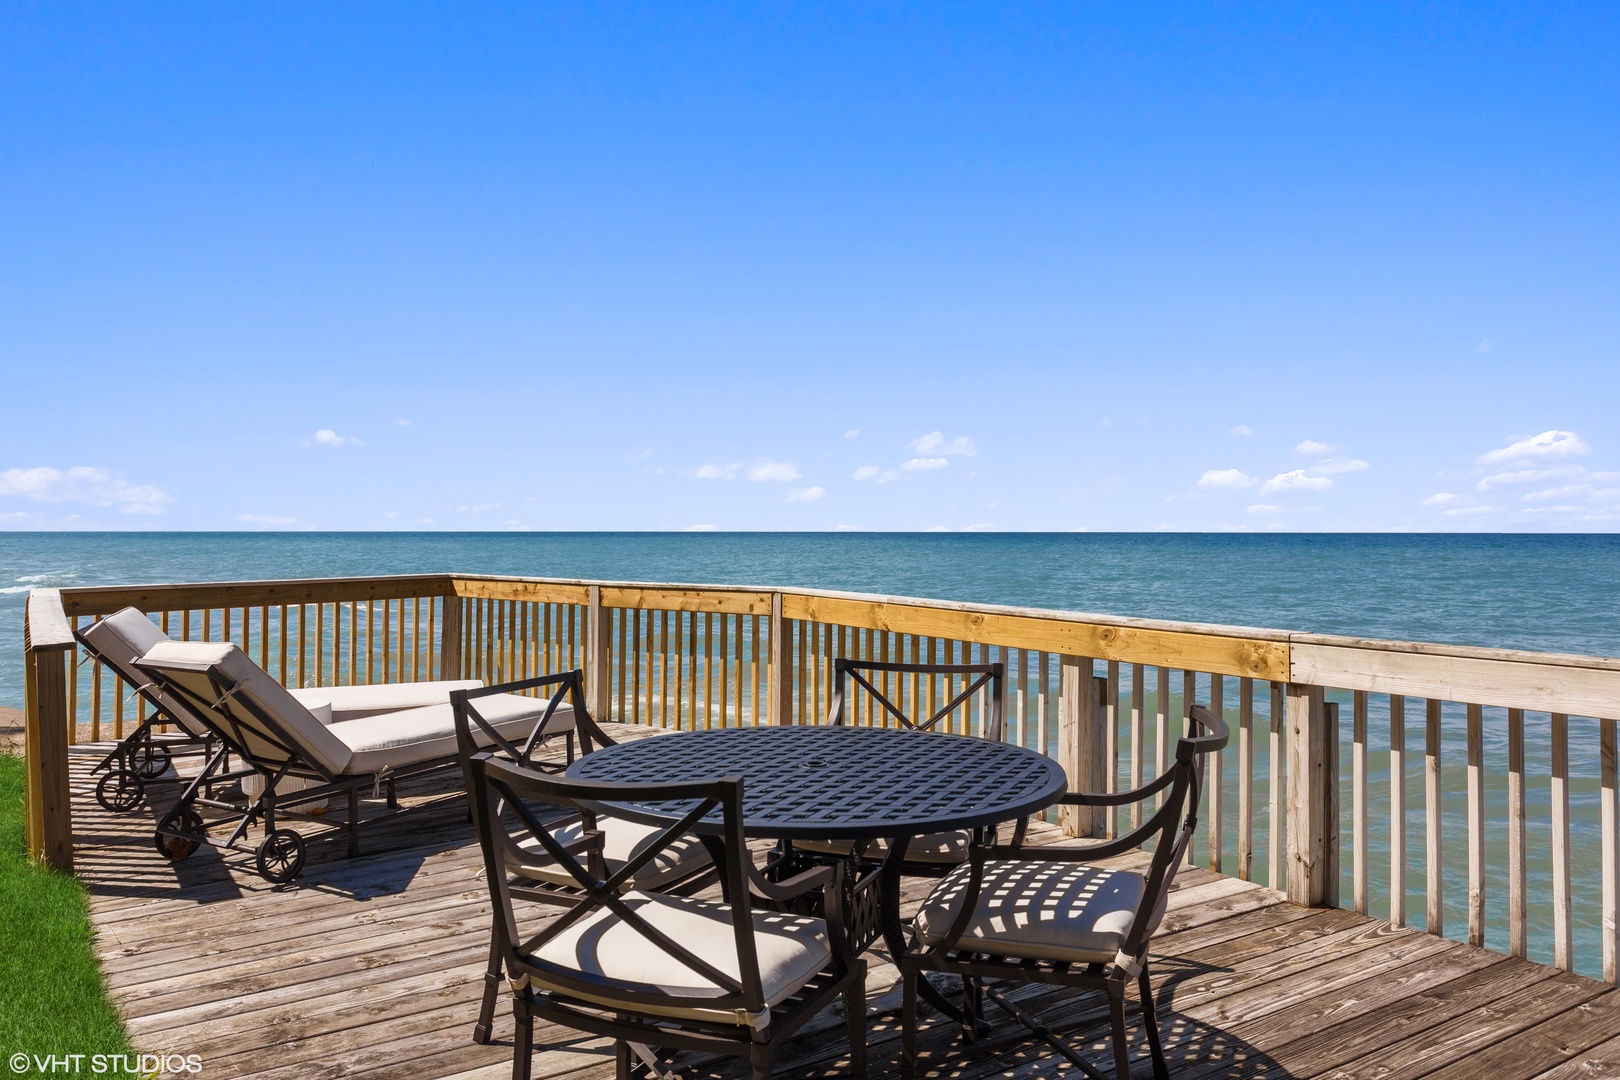 The view is the real show-stopper from the private deck.